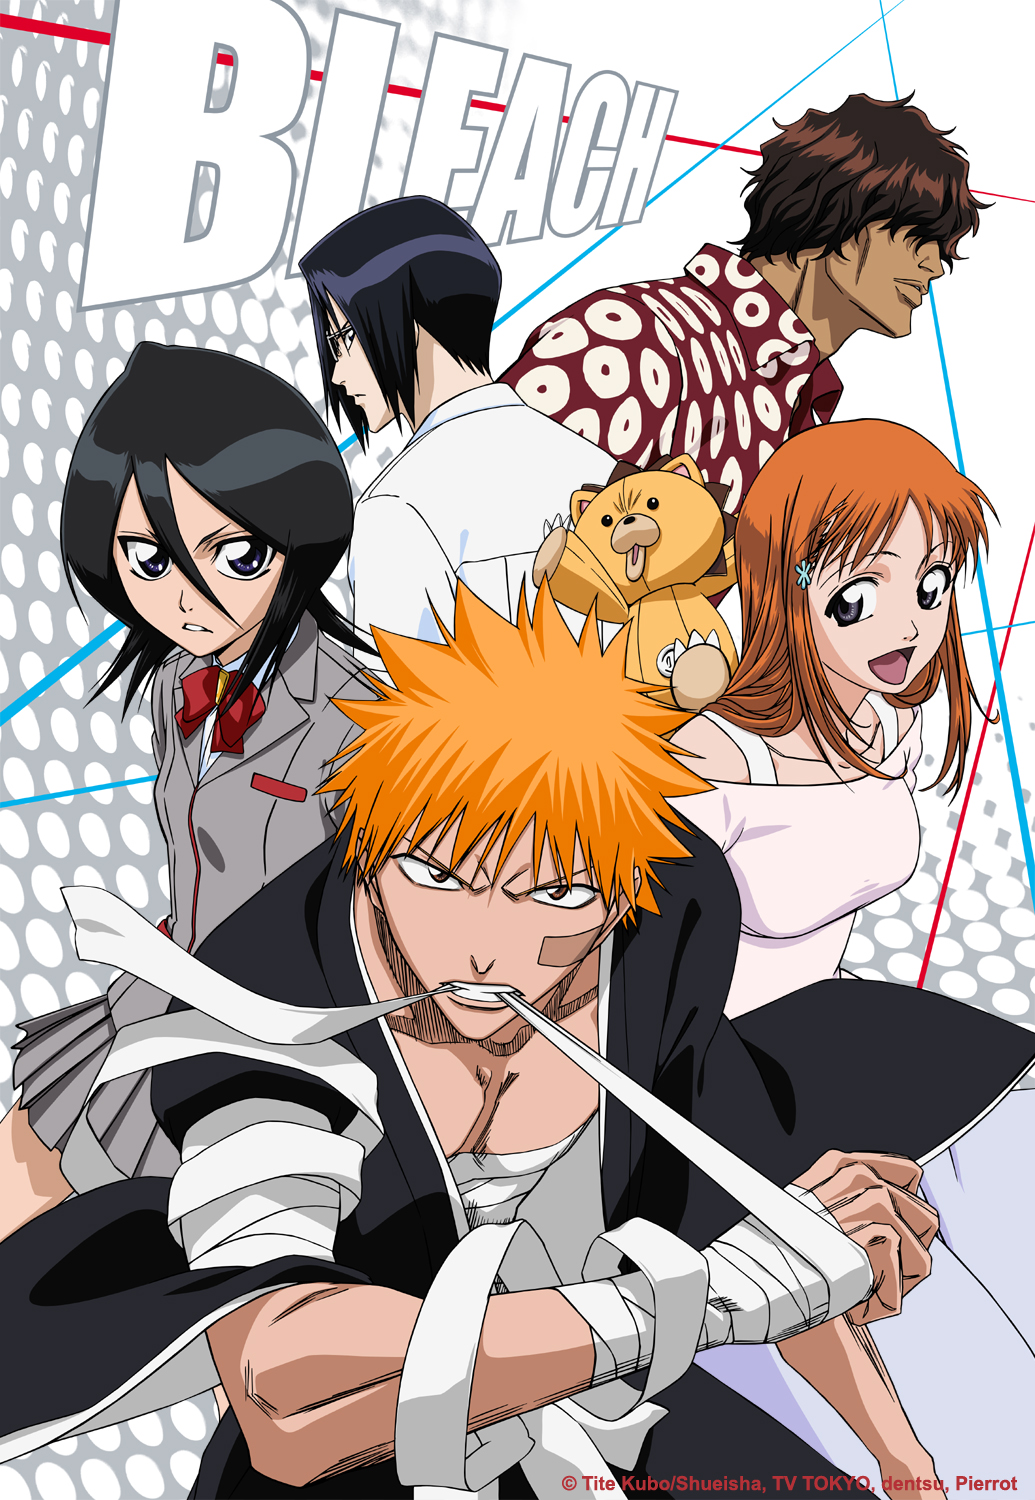 I just live my normal life”: Tite Kubo Had Already Been Working on Another  Series Before Bleach Ended, Hinted at a Future After His Magnum Opus -  FandomWire